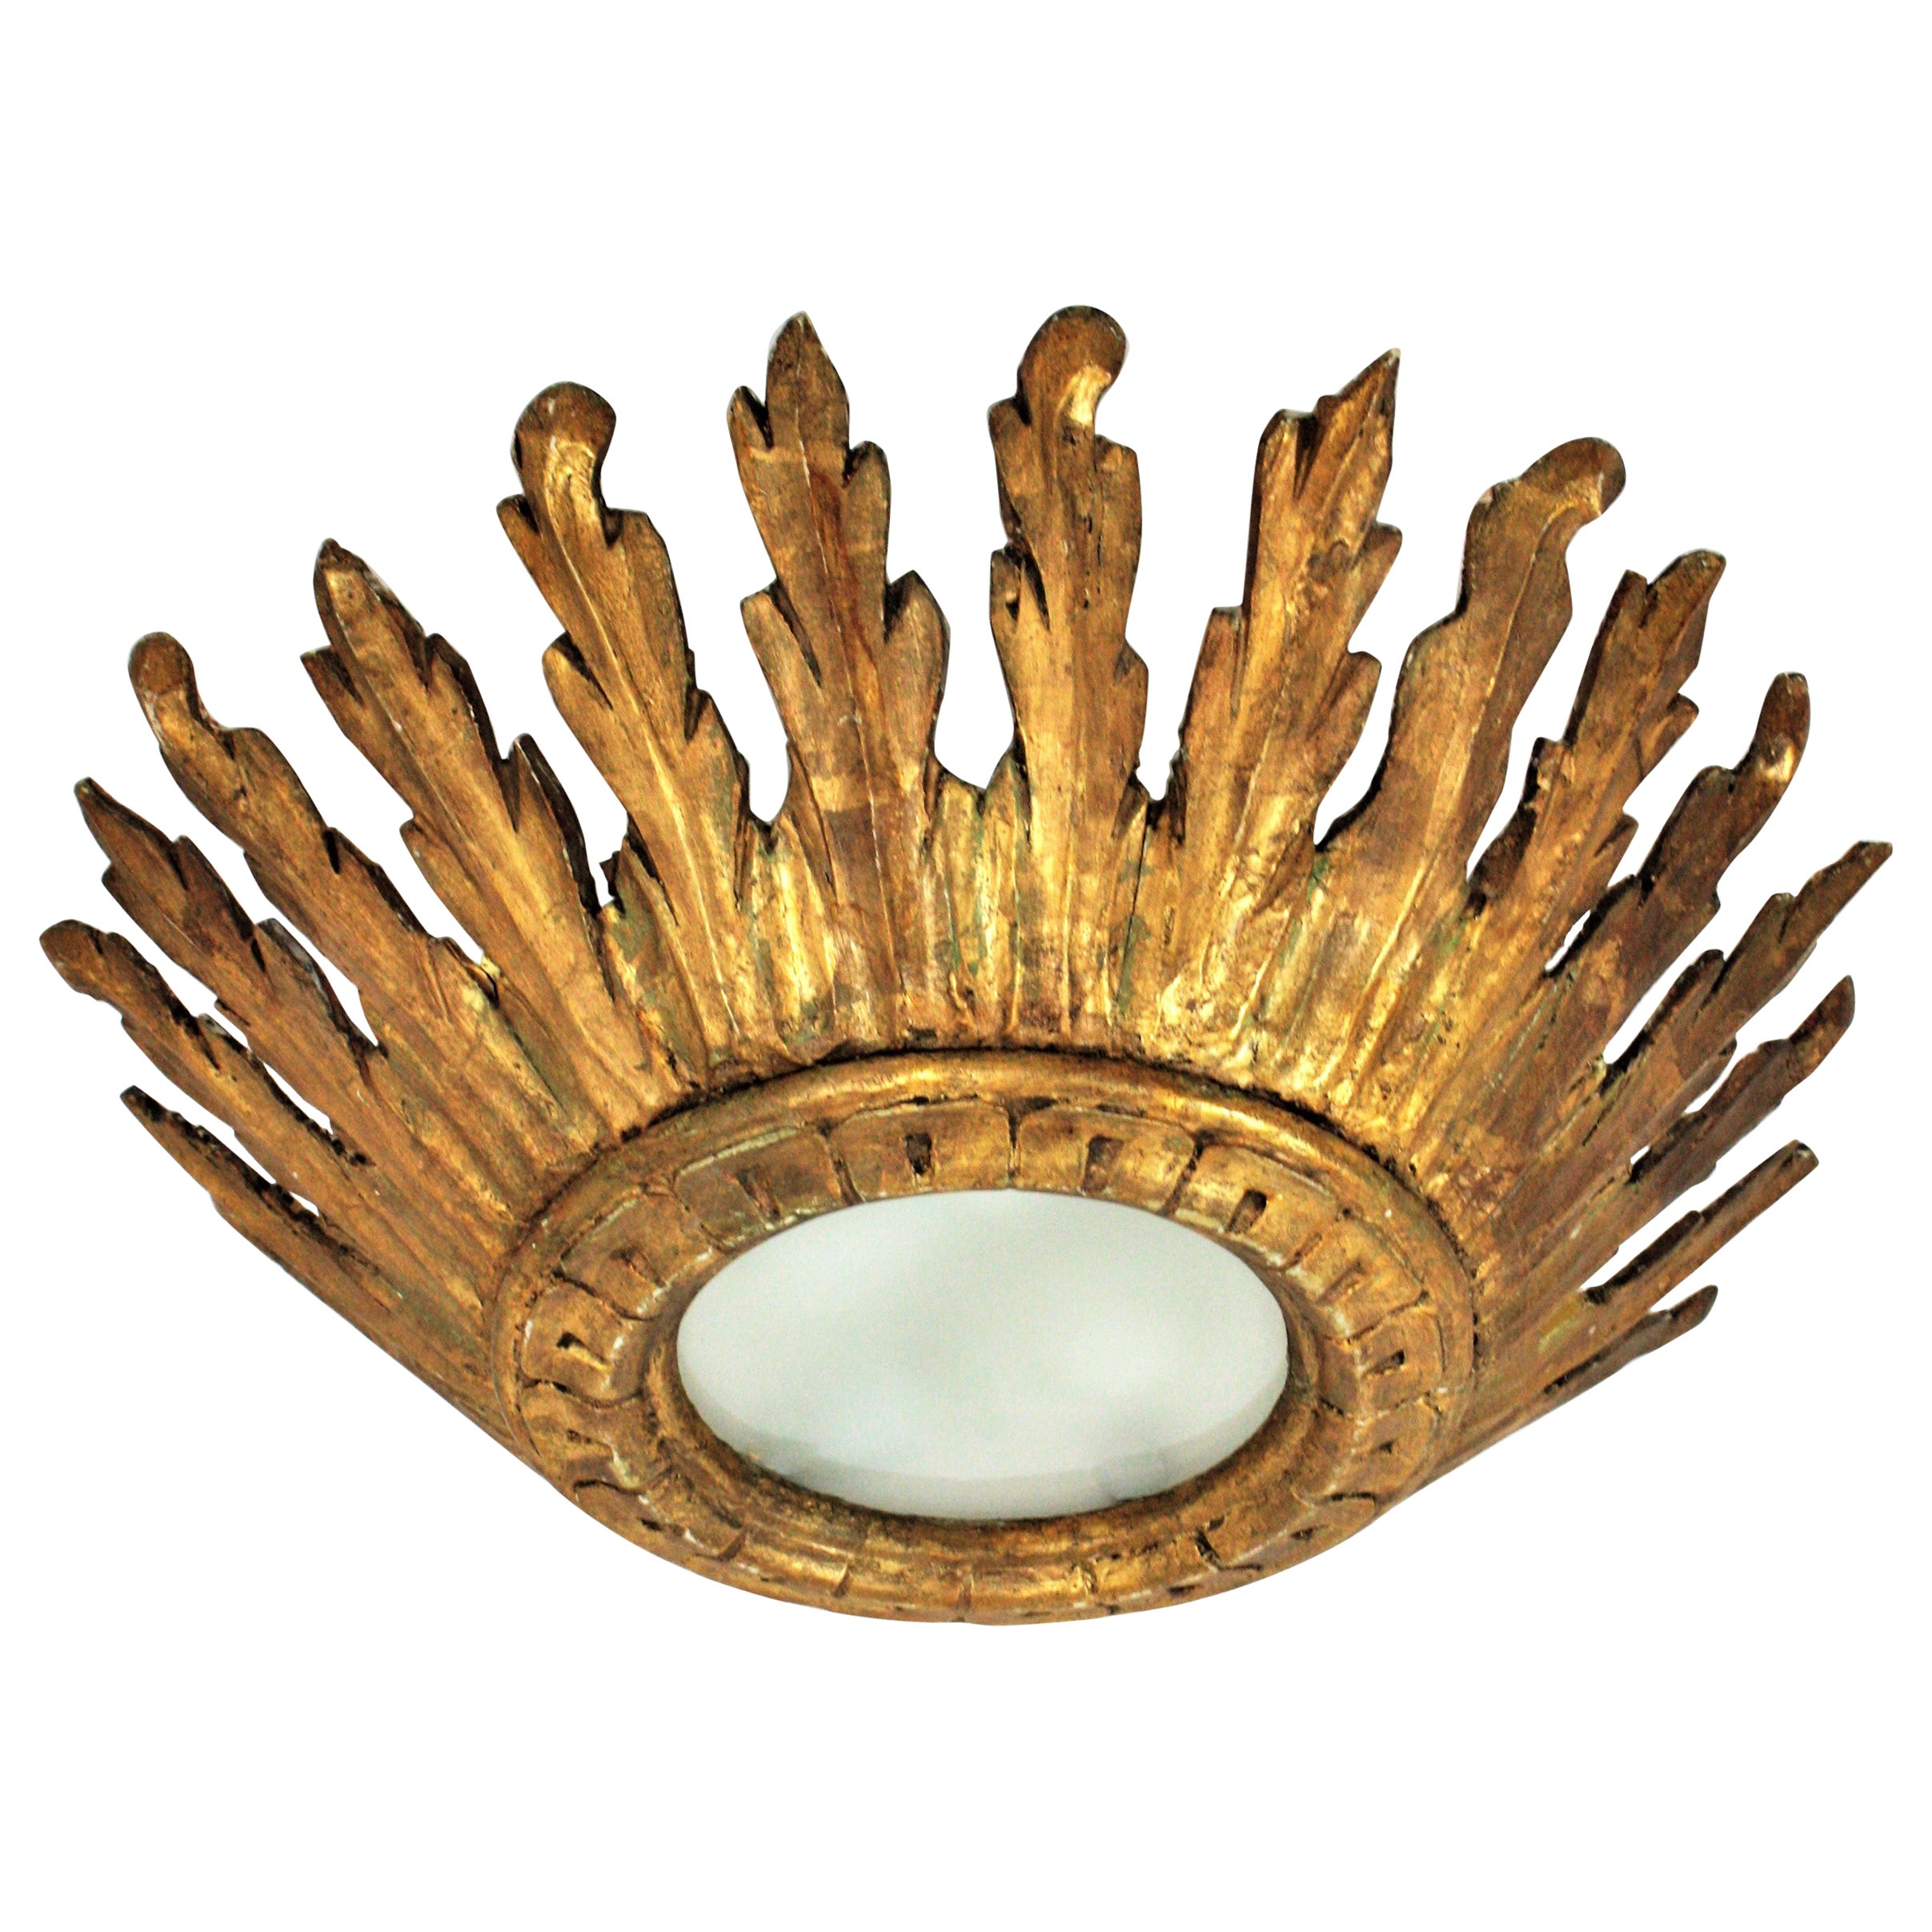 Crown sunburst flush mount, giltwood, gold leaf, Spain, 1930s-1940s.
Gorgeous baroque style carved gold leaf giltwood crown sunburst light fixture with frosted glass diffuser. 
This outstanding sunburst crown flush mount can be used also as a